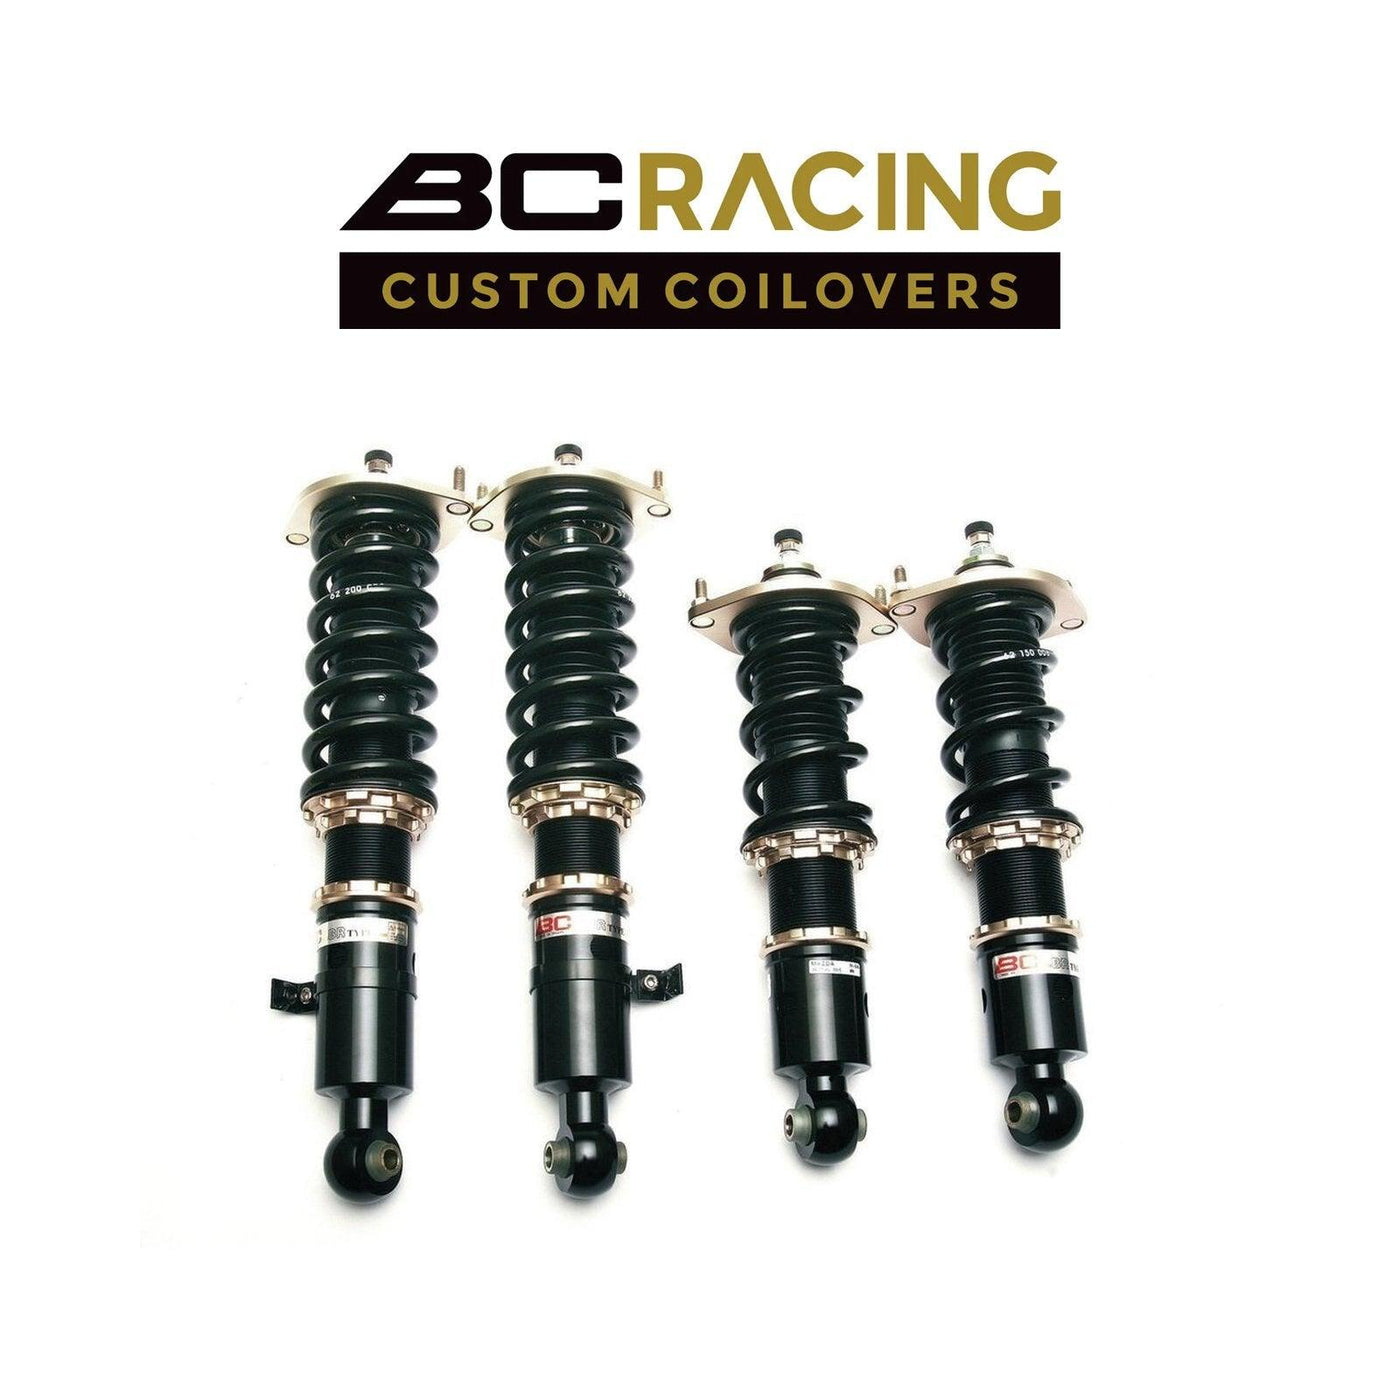 BC Racing Coilovers 2003-2009 BENZ E-Class Sedan (Excl. Airmatic) - Attacking the Clock Racing